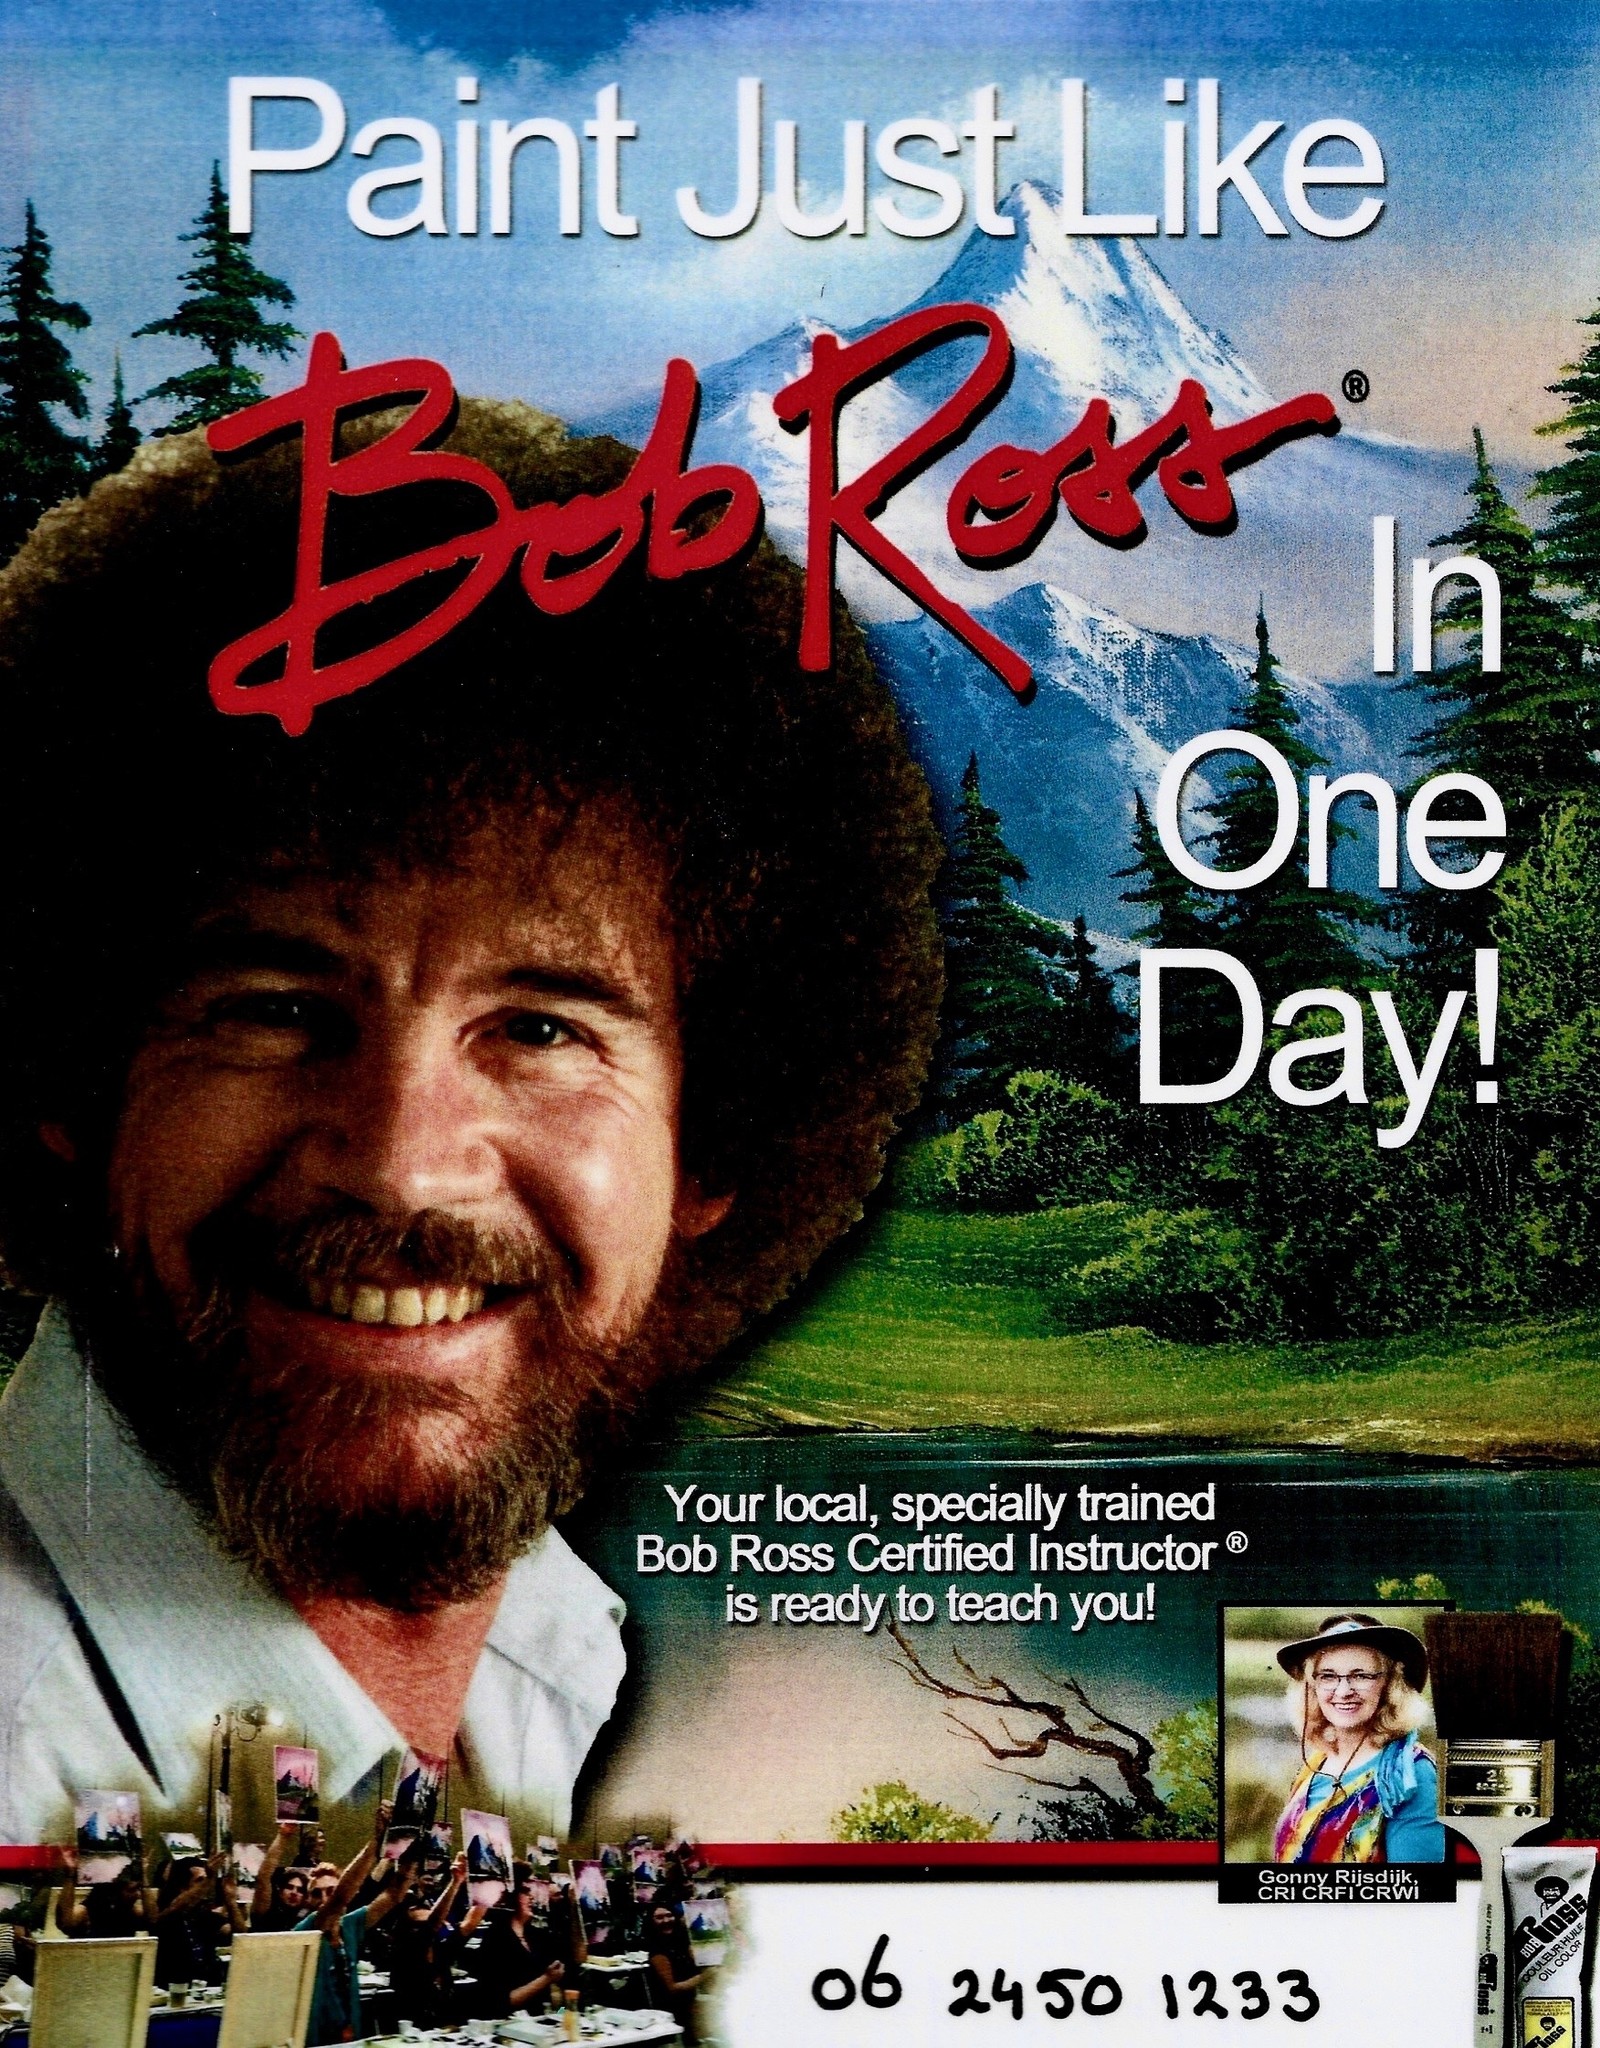 Bob Ross painting workshop in one day